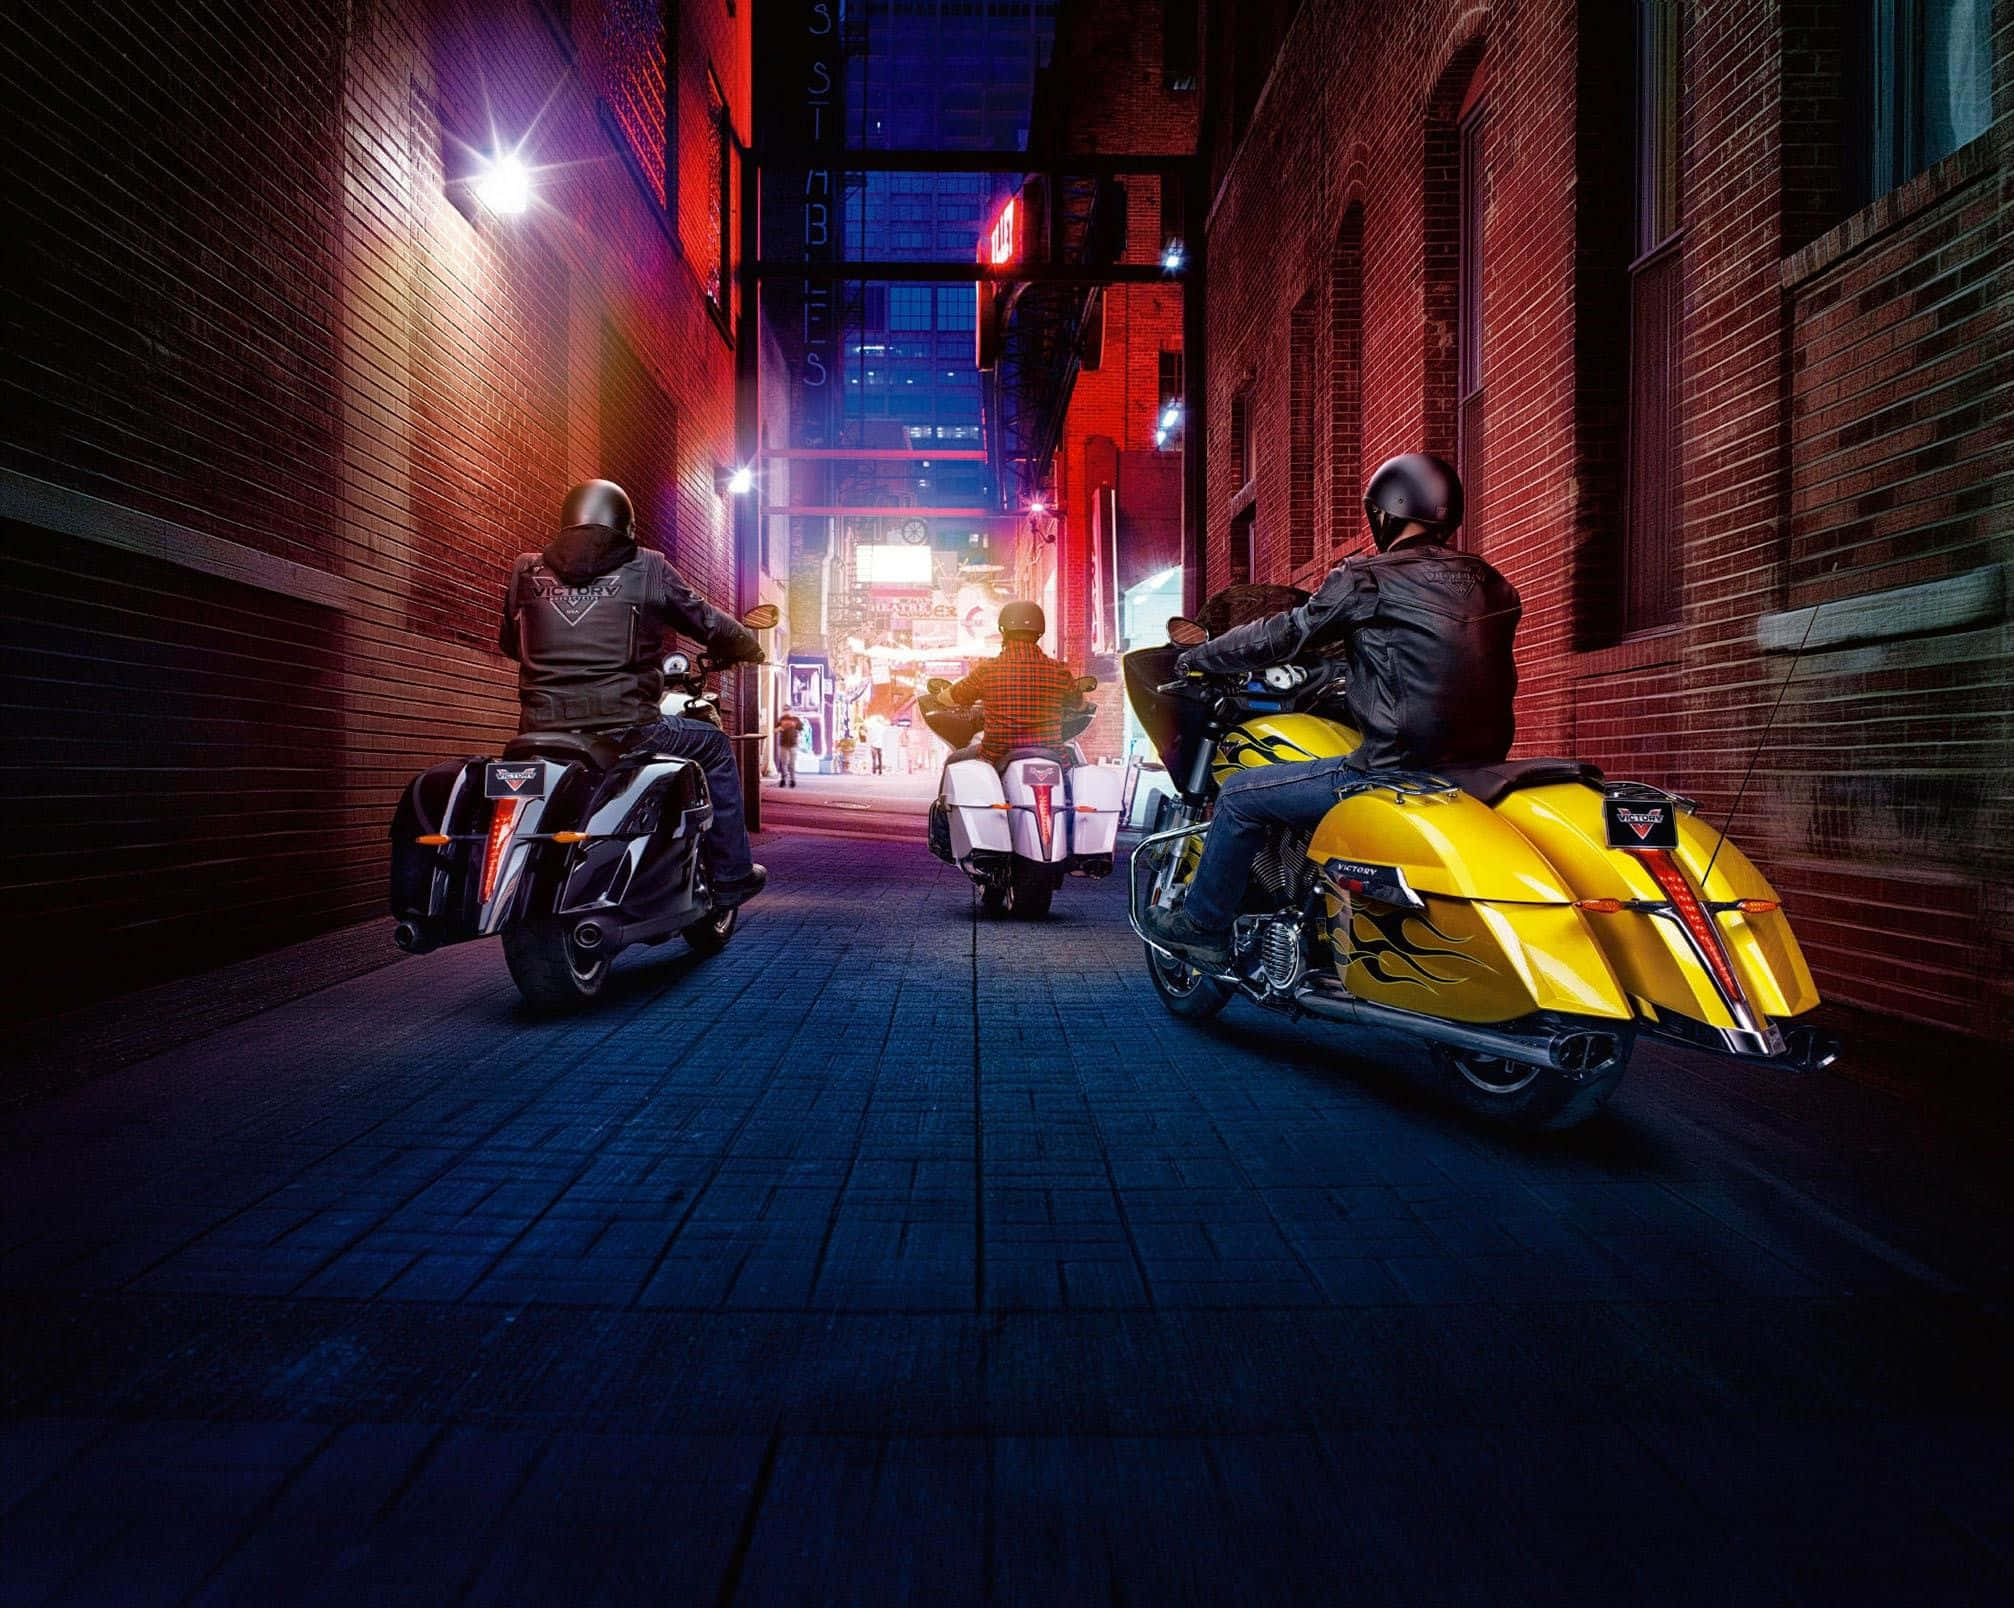 Striking Victory Motorcycle In Nighttime Cityscape Background